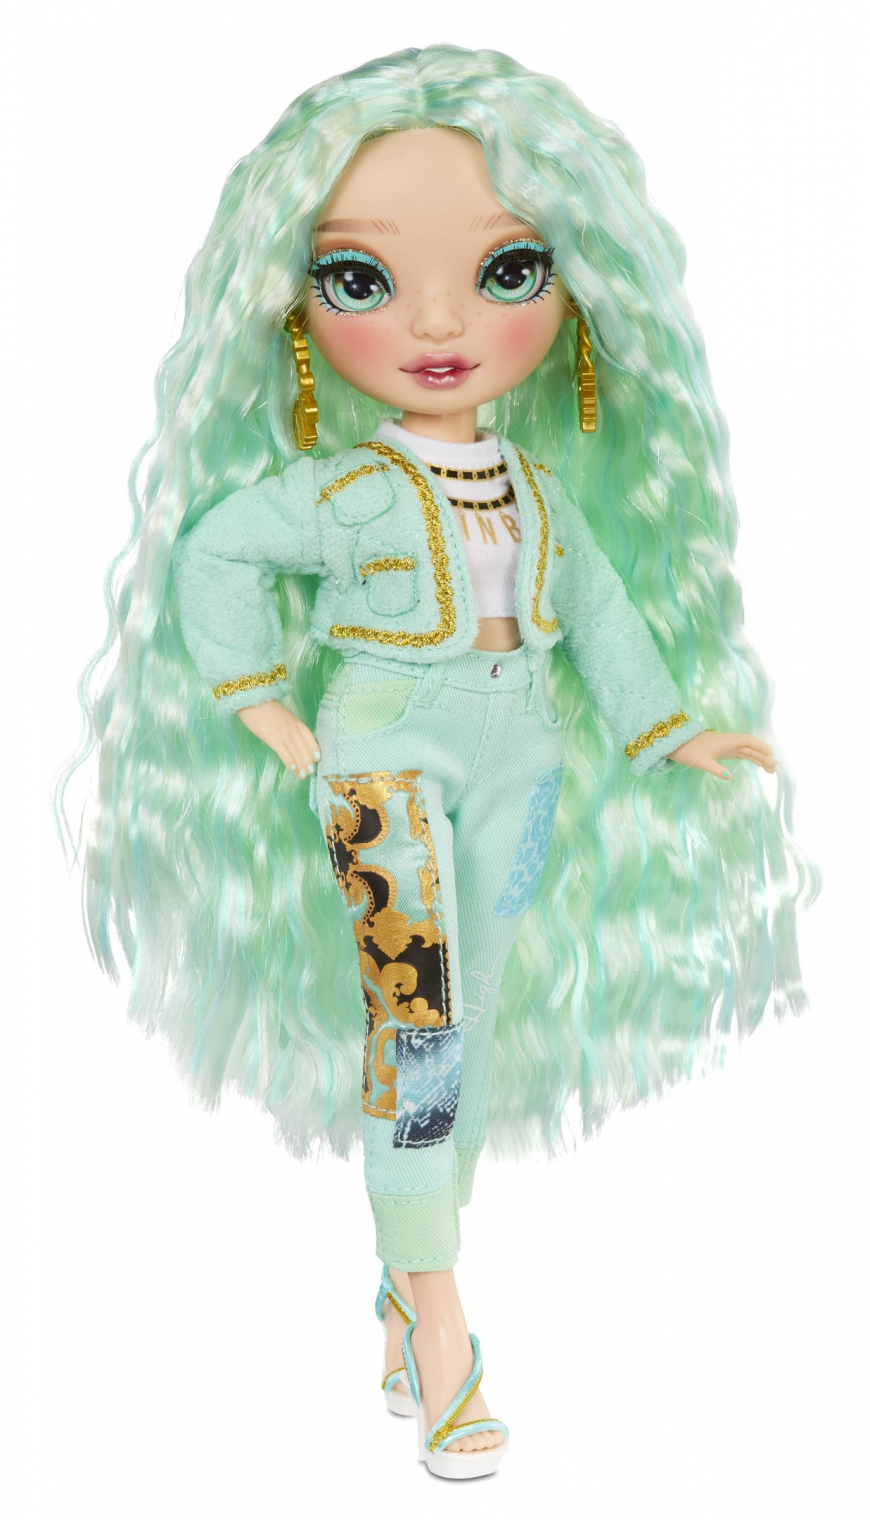 Rainbow High Series 3 Mint Daphne Minton doll In second outfit